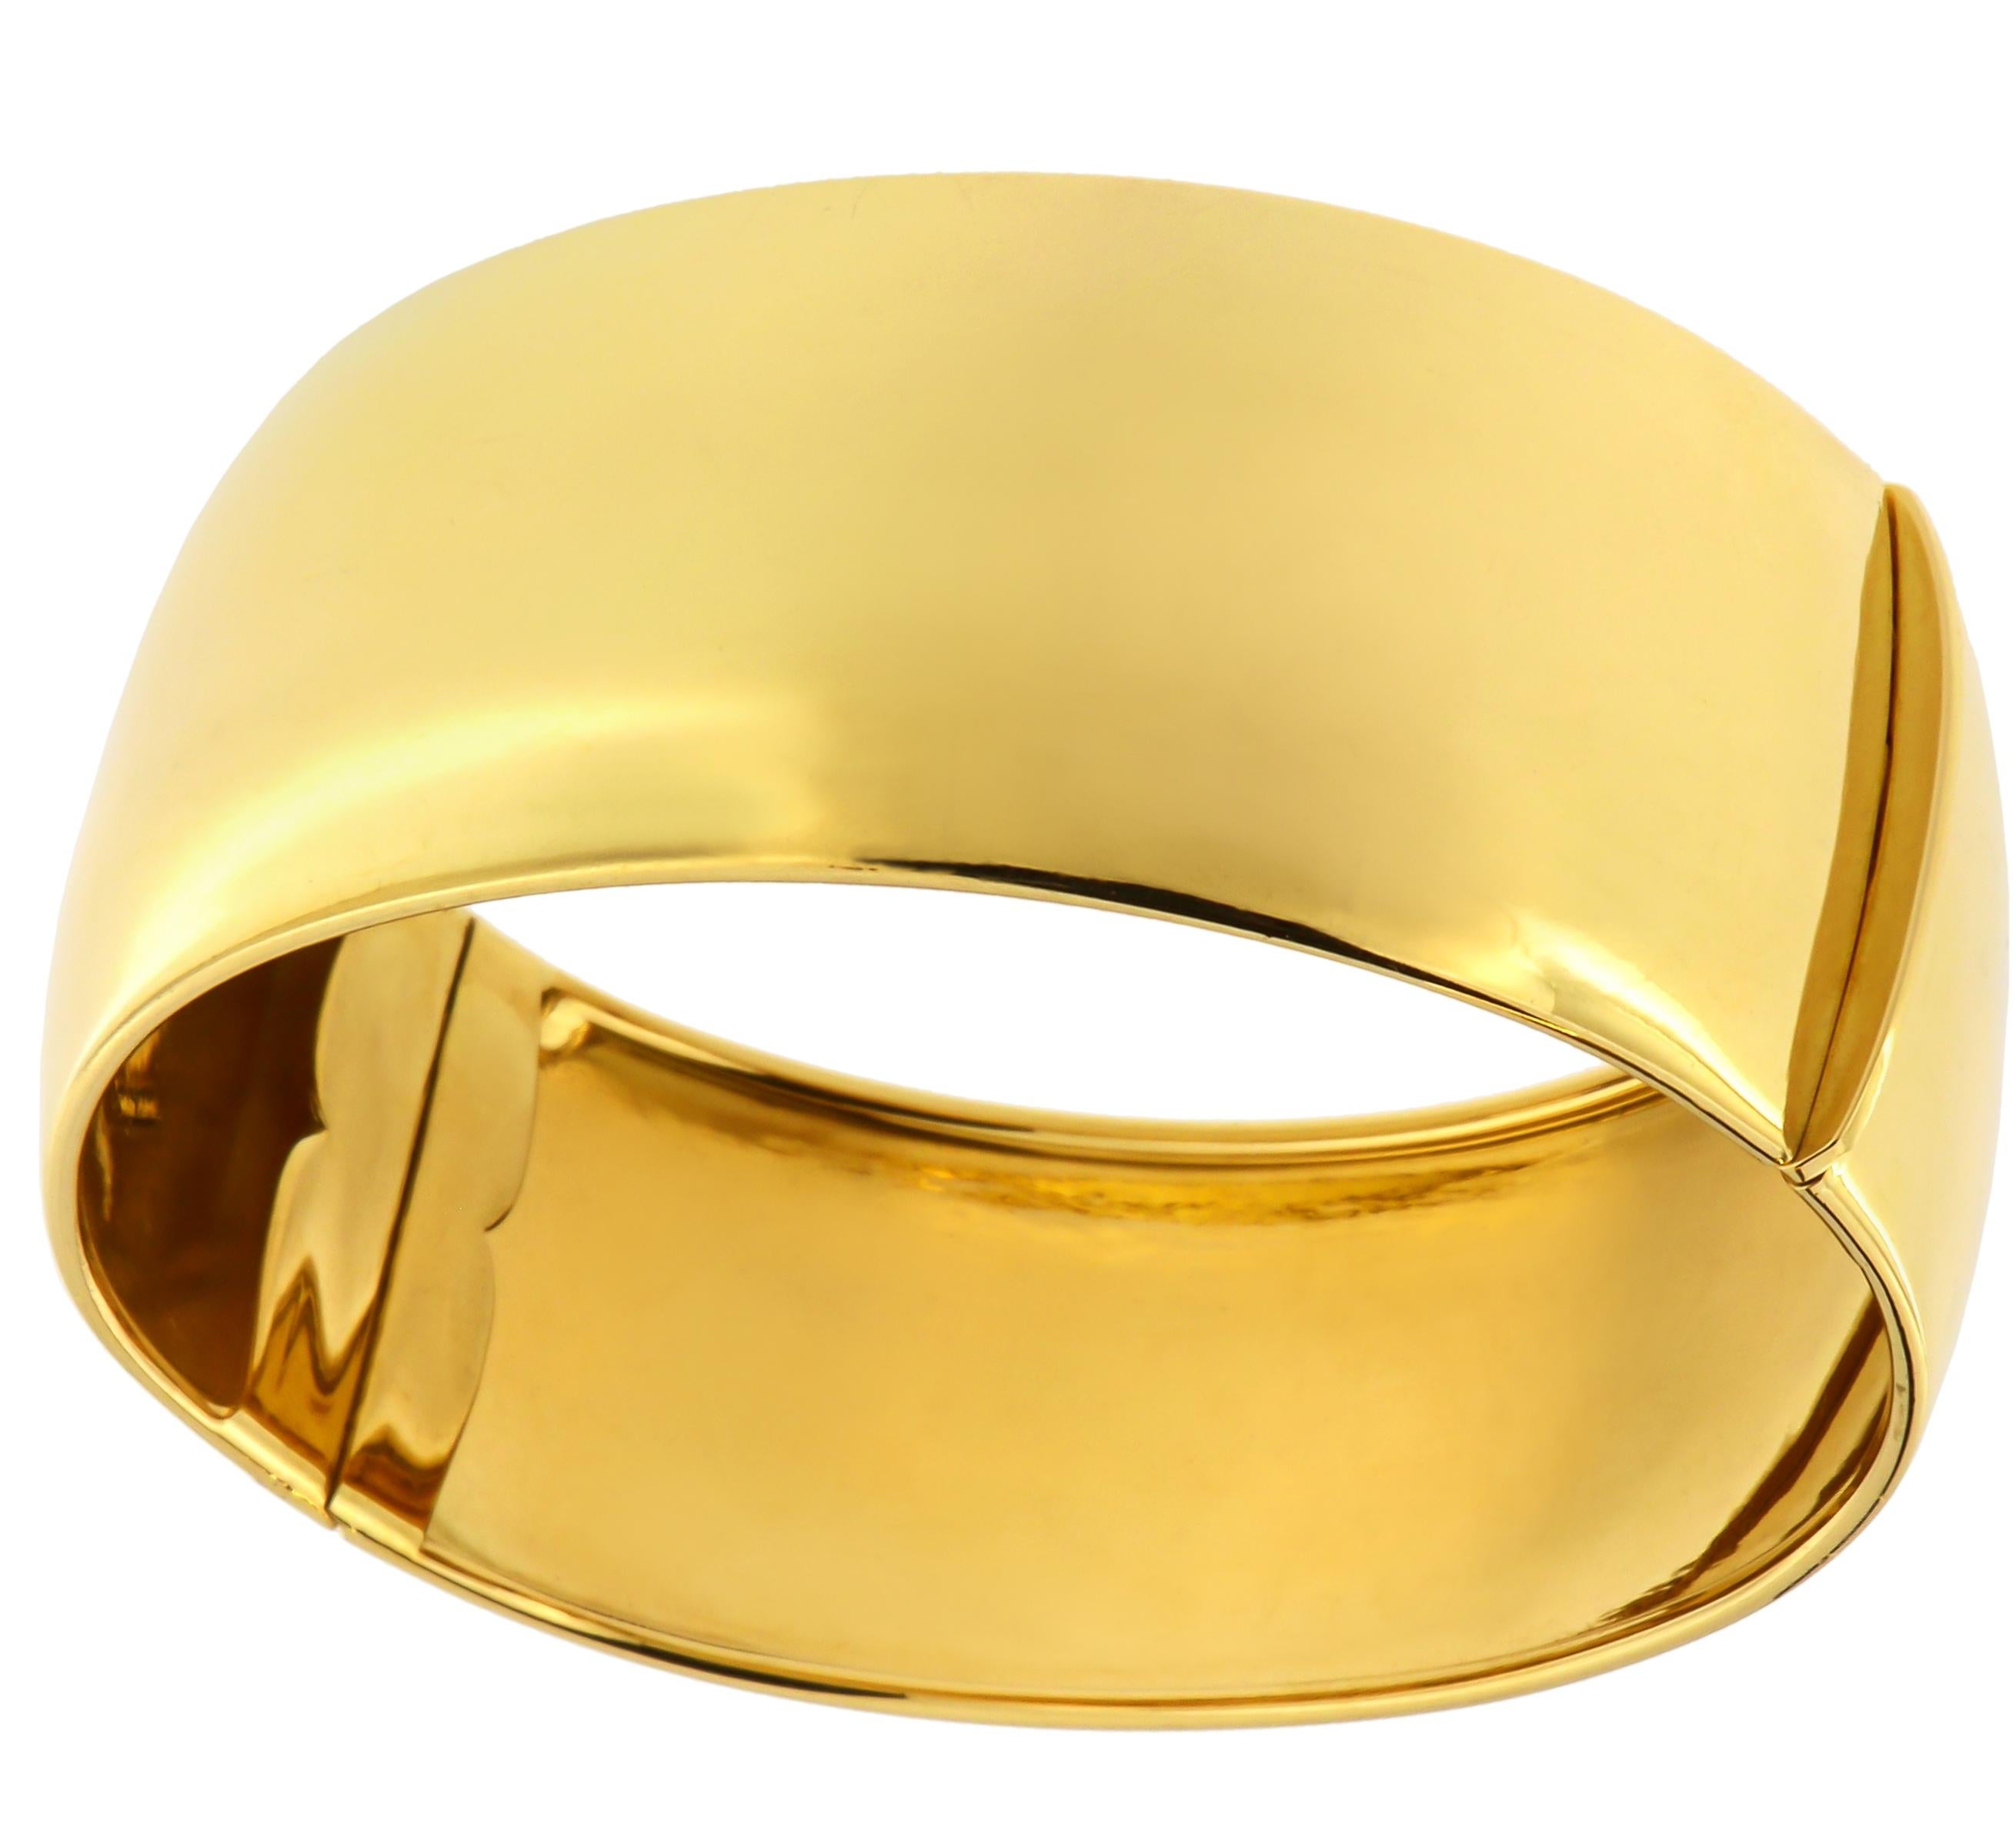 1980s Cuff Bracelet in 18k yellow gold. The bracelet width is 25 mm / 0.984 inches. The inner dimension of the bracelet is 60 x 55 mm / 2.362 x 2.165 inches. It is handcrafted in Italy and marked with the Italian Gold Mark 750 and brandmark